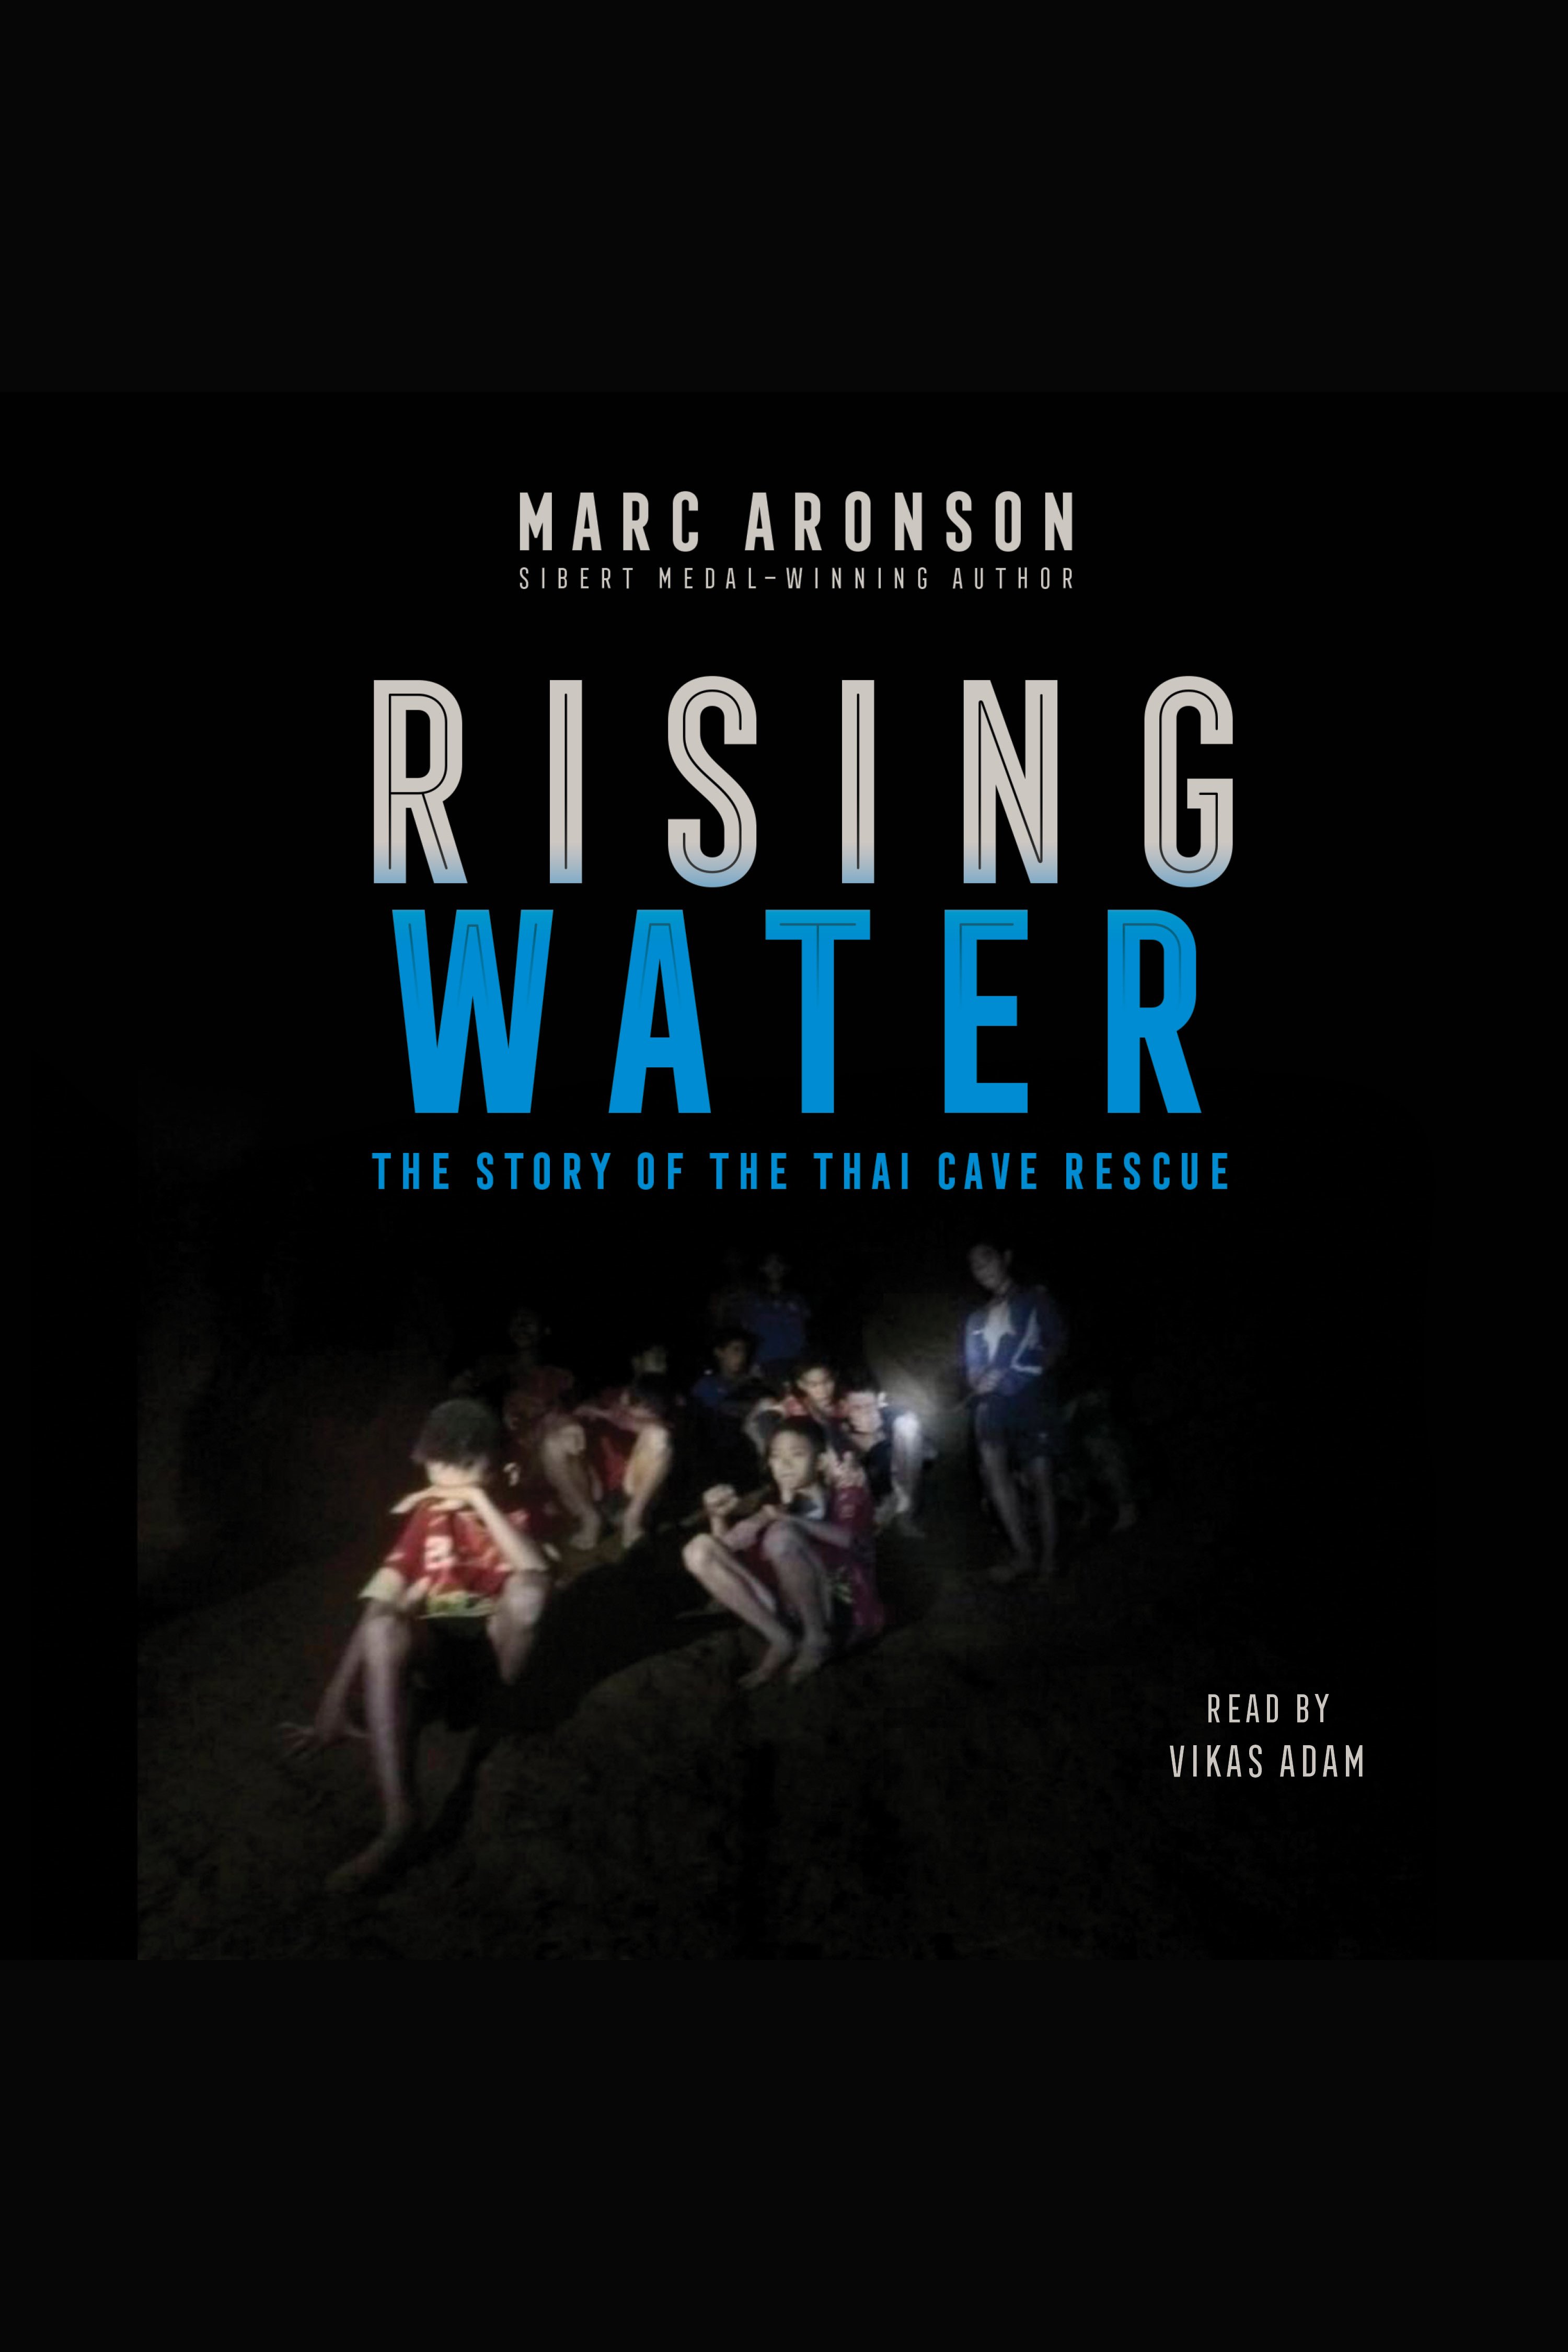 Rising water the story of the Thai cave rescue cover image